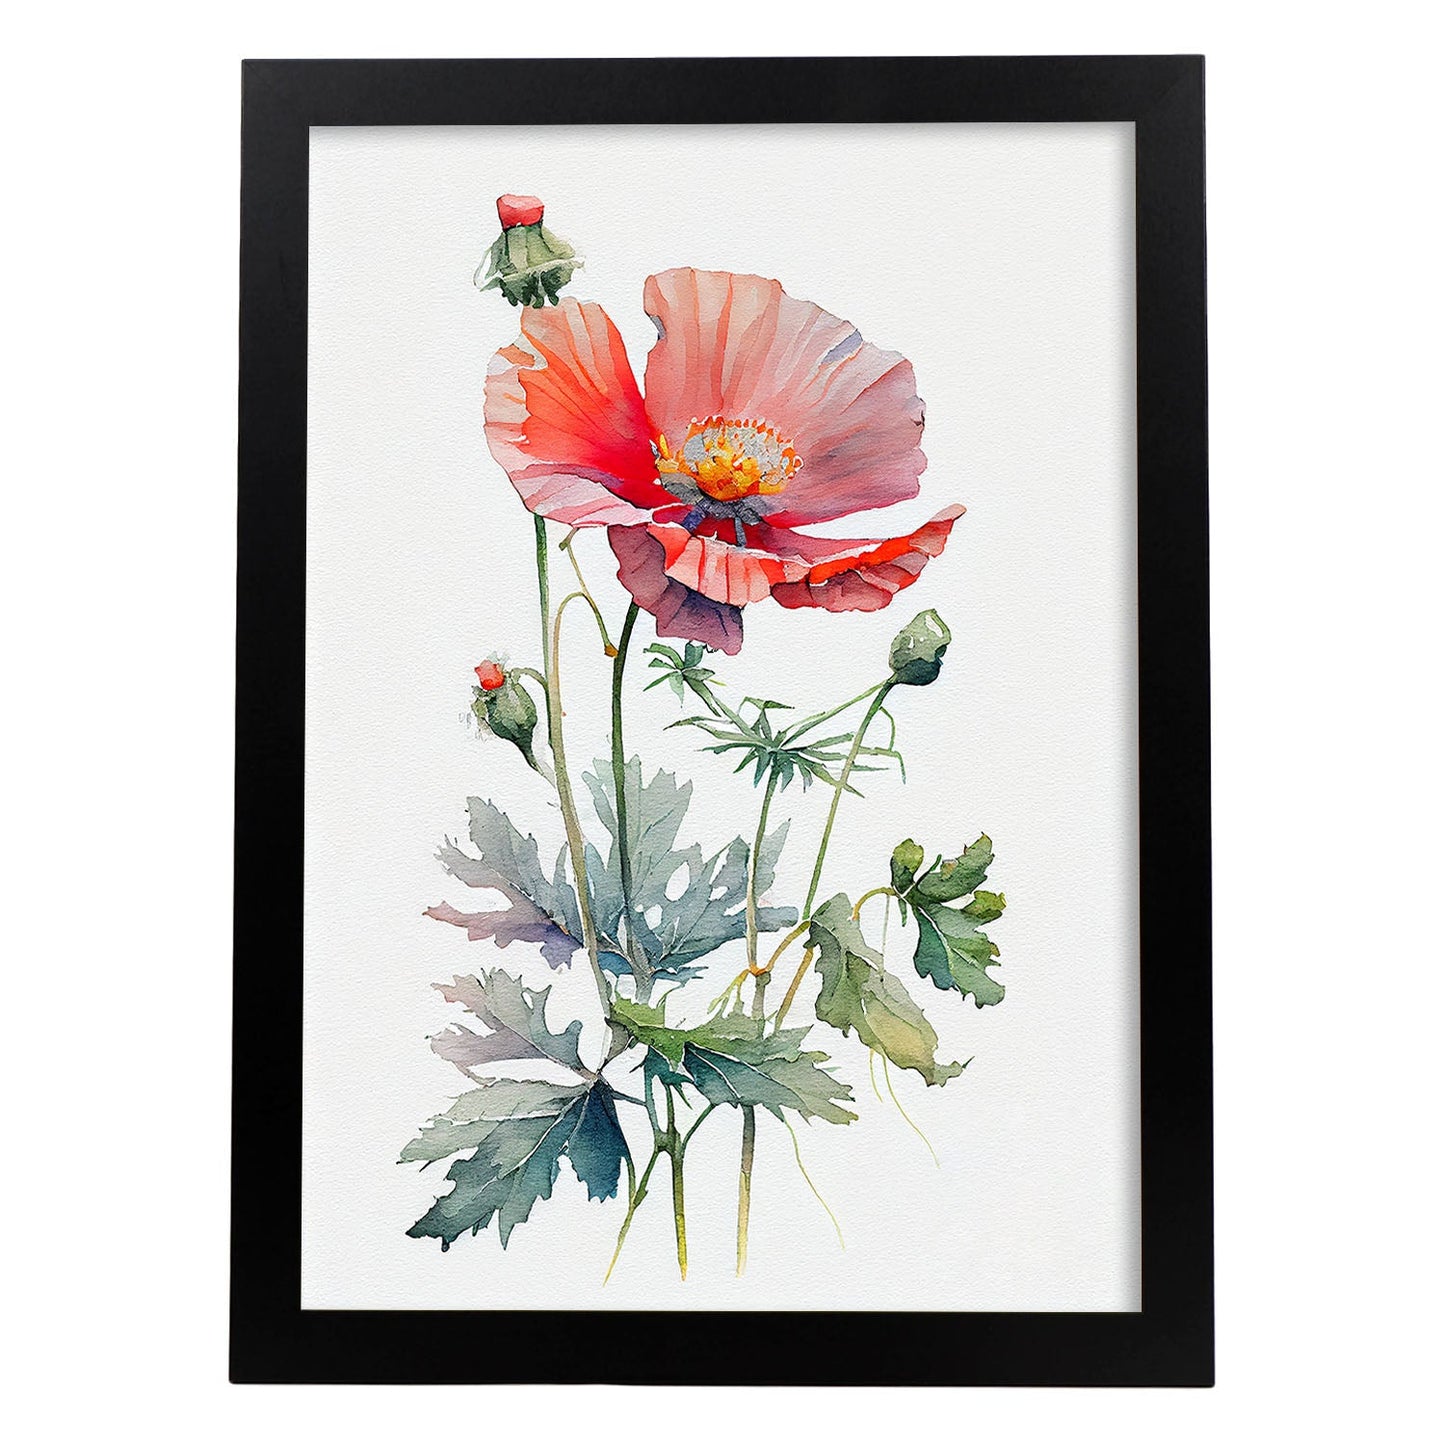 Nacnic watercolor minmal Poppy_1. Aesthetic Wall Art Prints for Bedroom or Living Room Design.